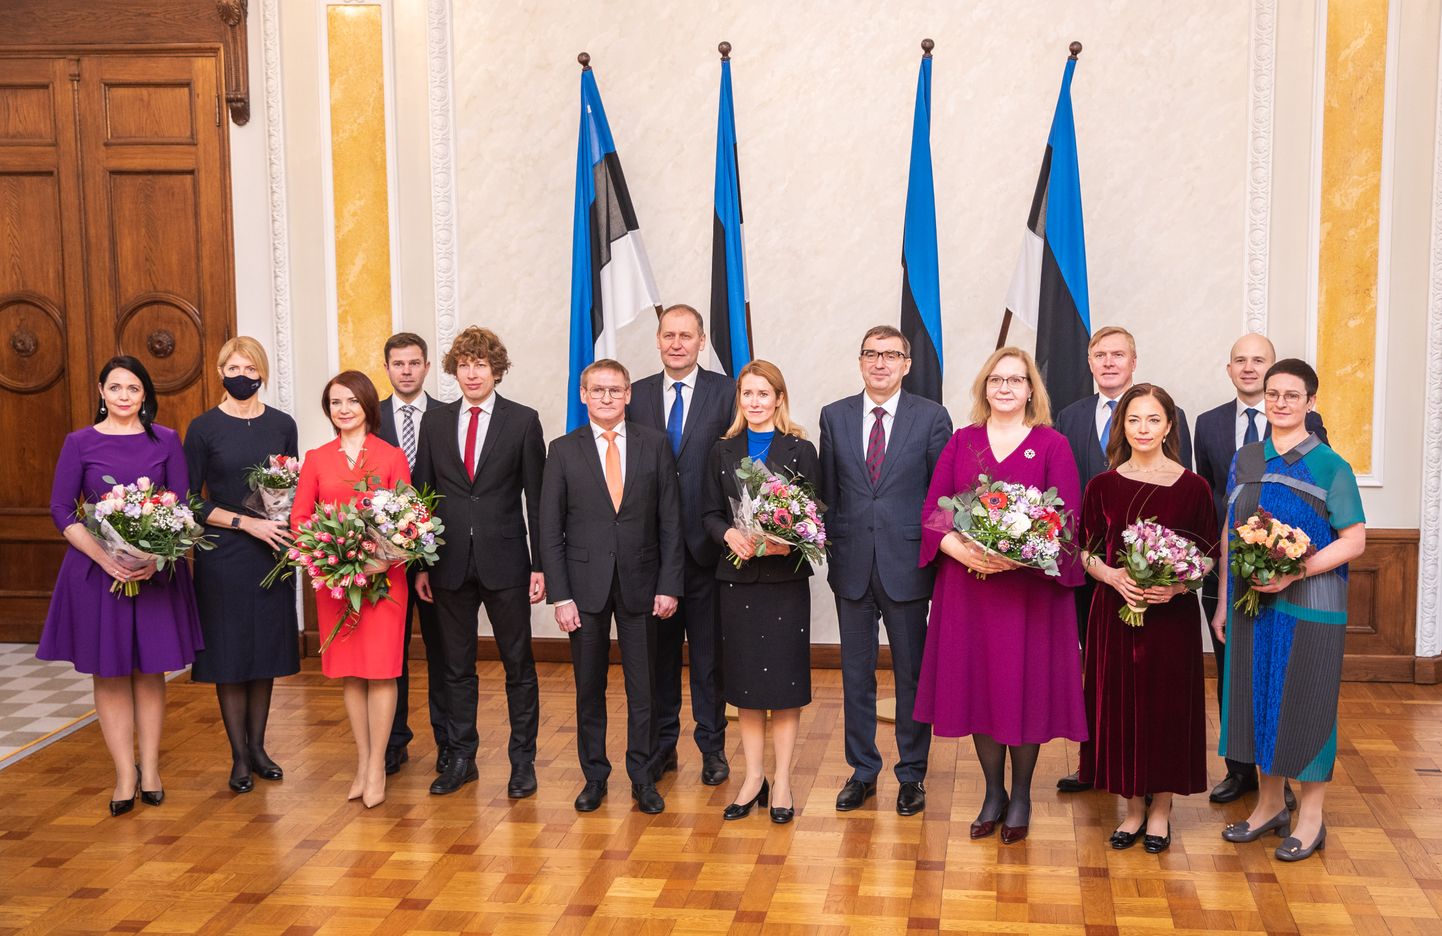 The ministers of the government of Kaja Kallas.